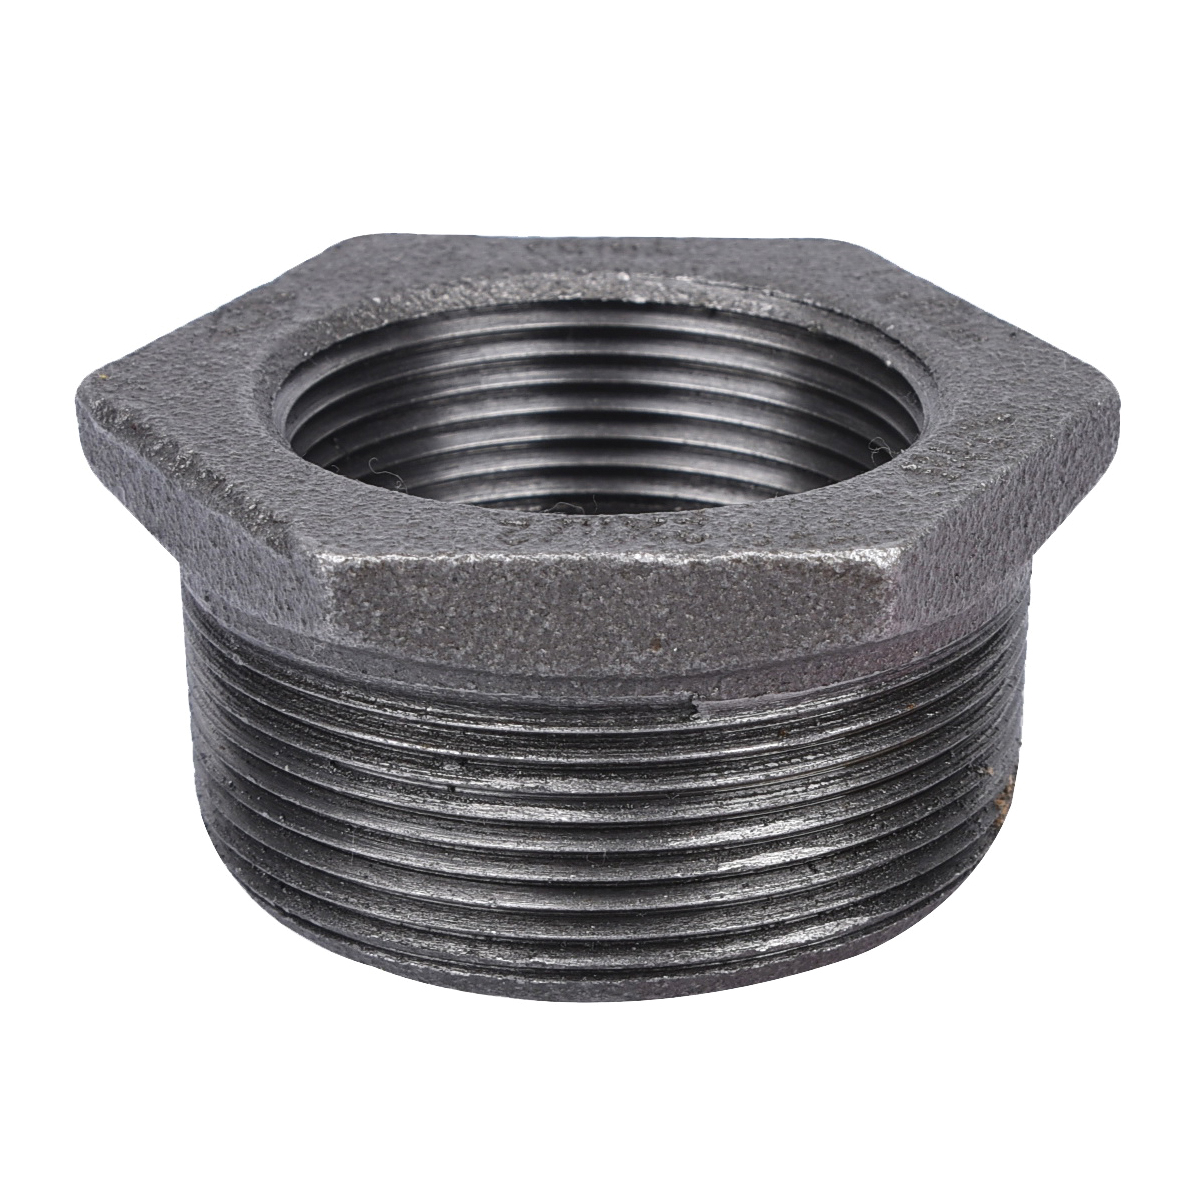 35-2X1-1/2B Pipe Bushing, 2 x 1-1/2 in, Threaded x Female Inlet x Male Outlet, Steel, 300 psi Pressure